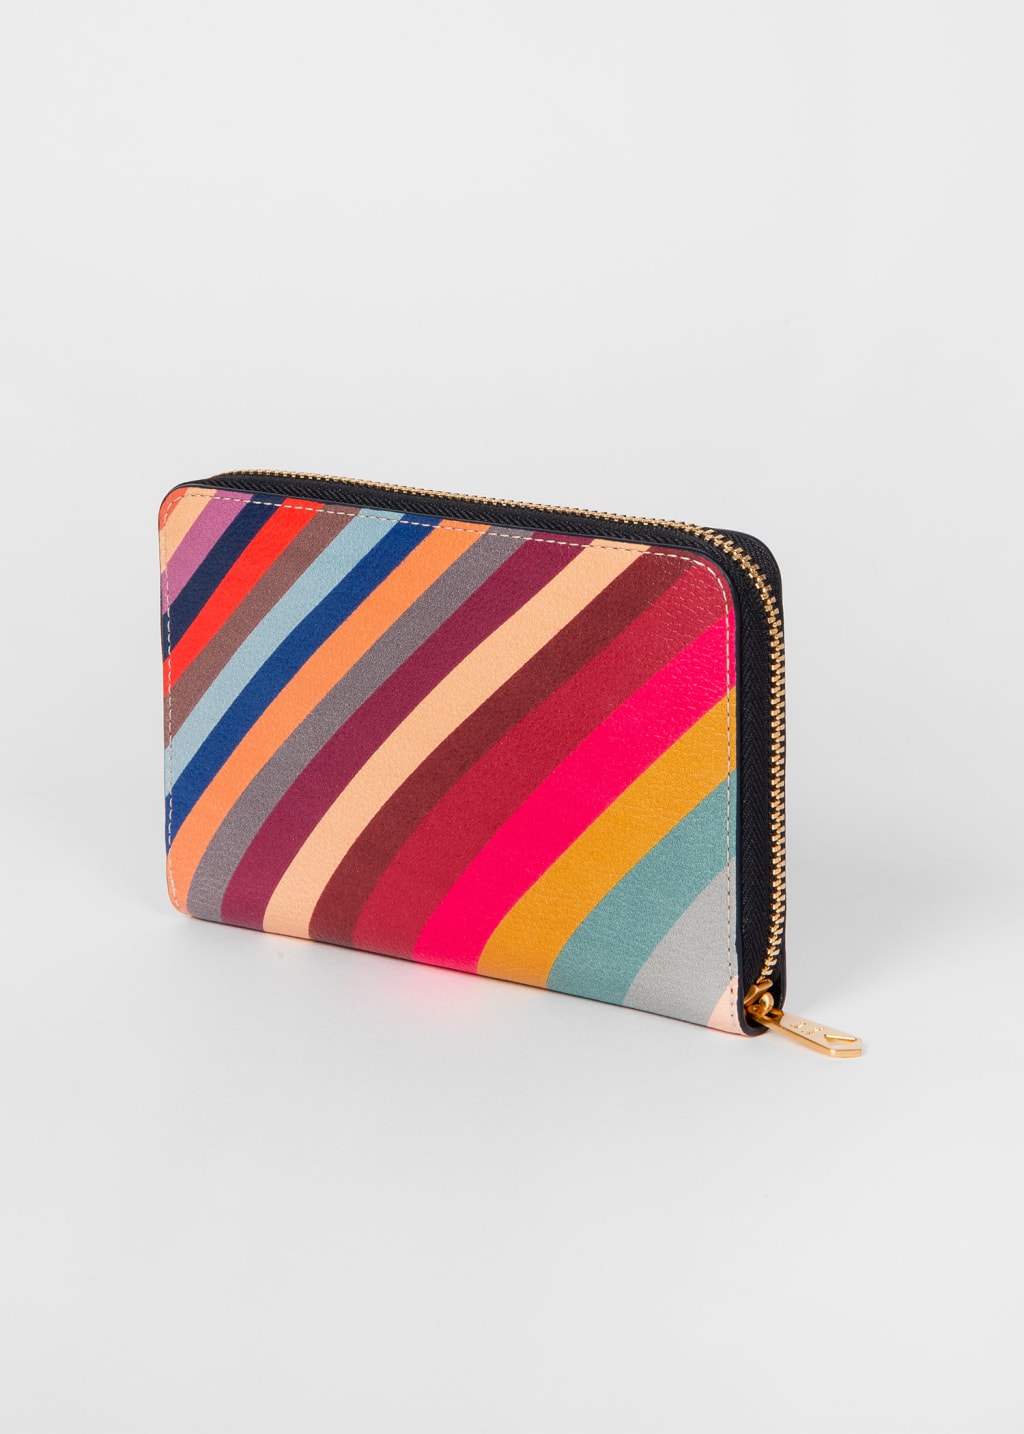 Product View - Medium 'Swirl' Leather Zip-Around Purse by Paul Smith